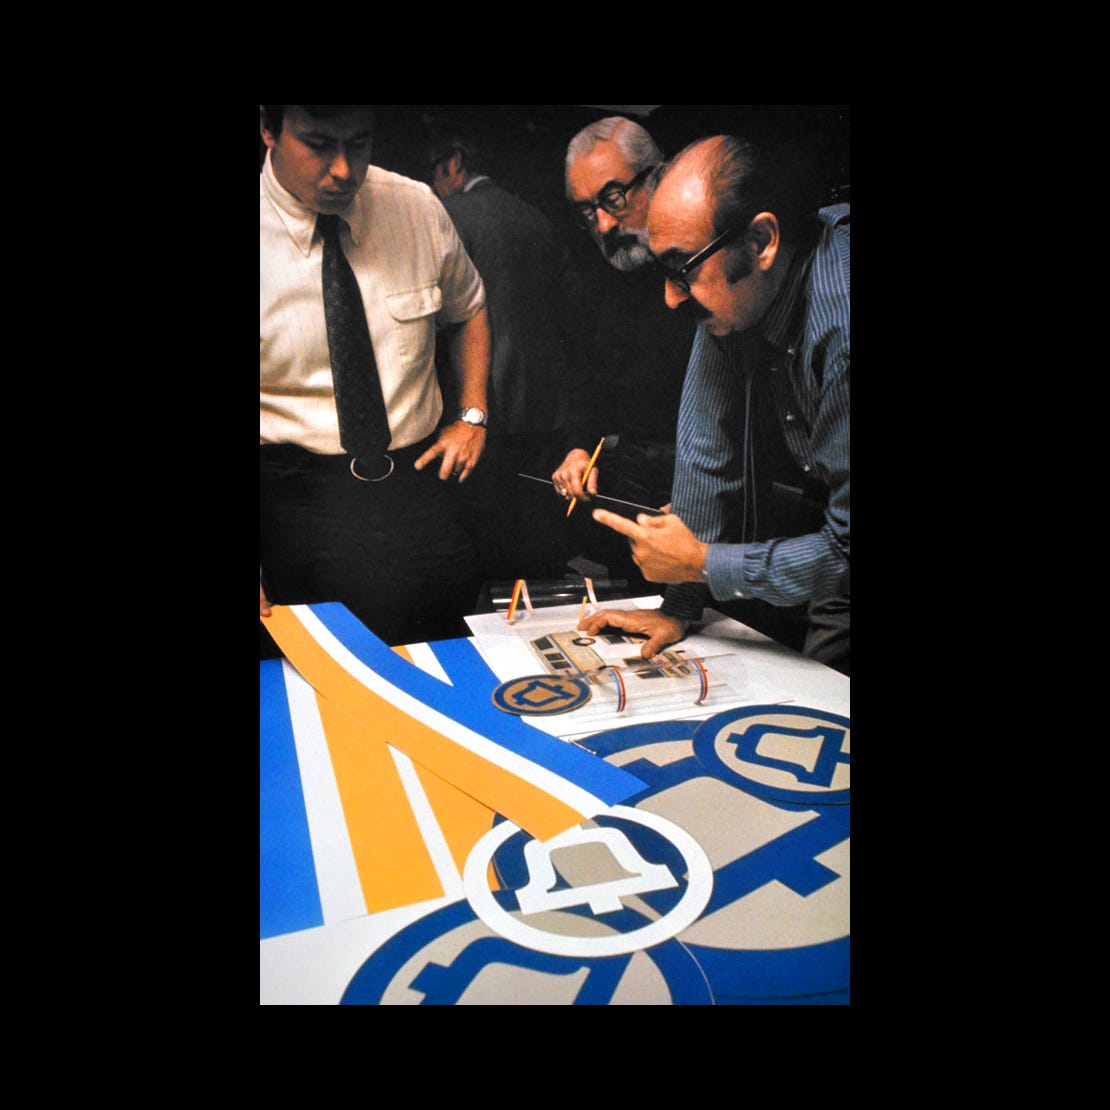 Saul Bass & Associates working on the logo and corporate identity for AT&T